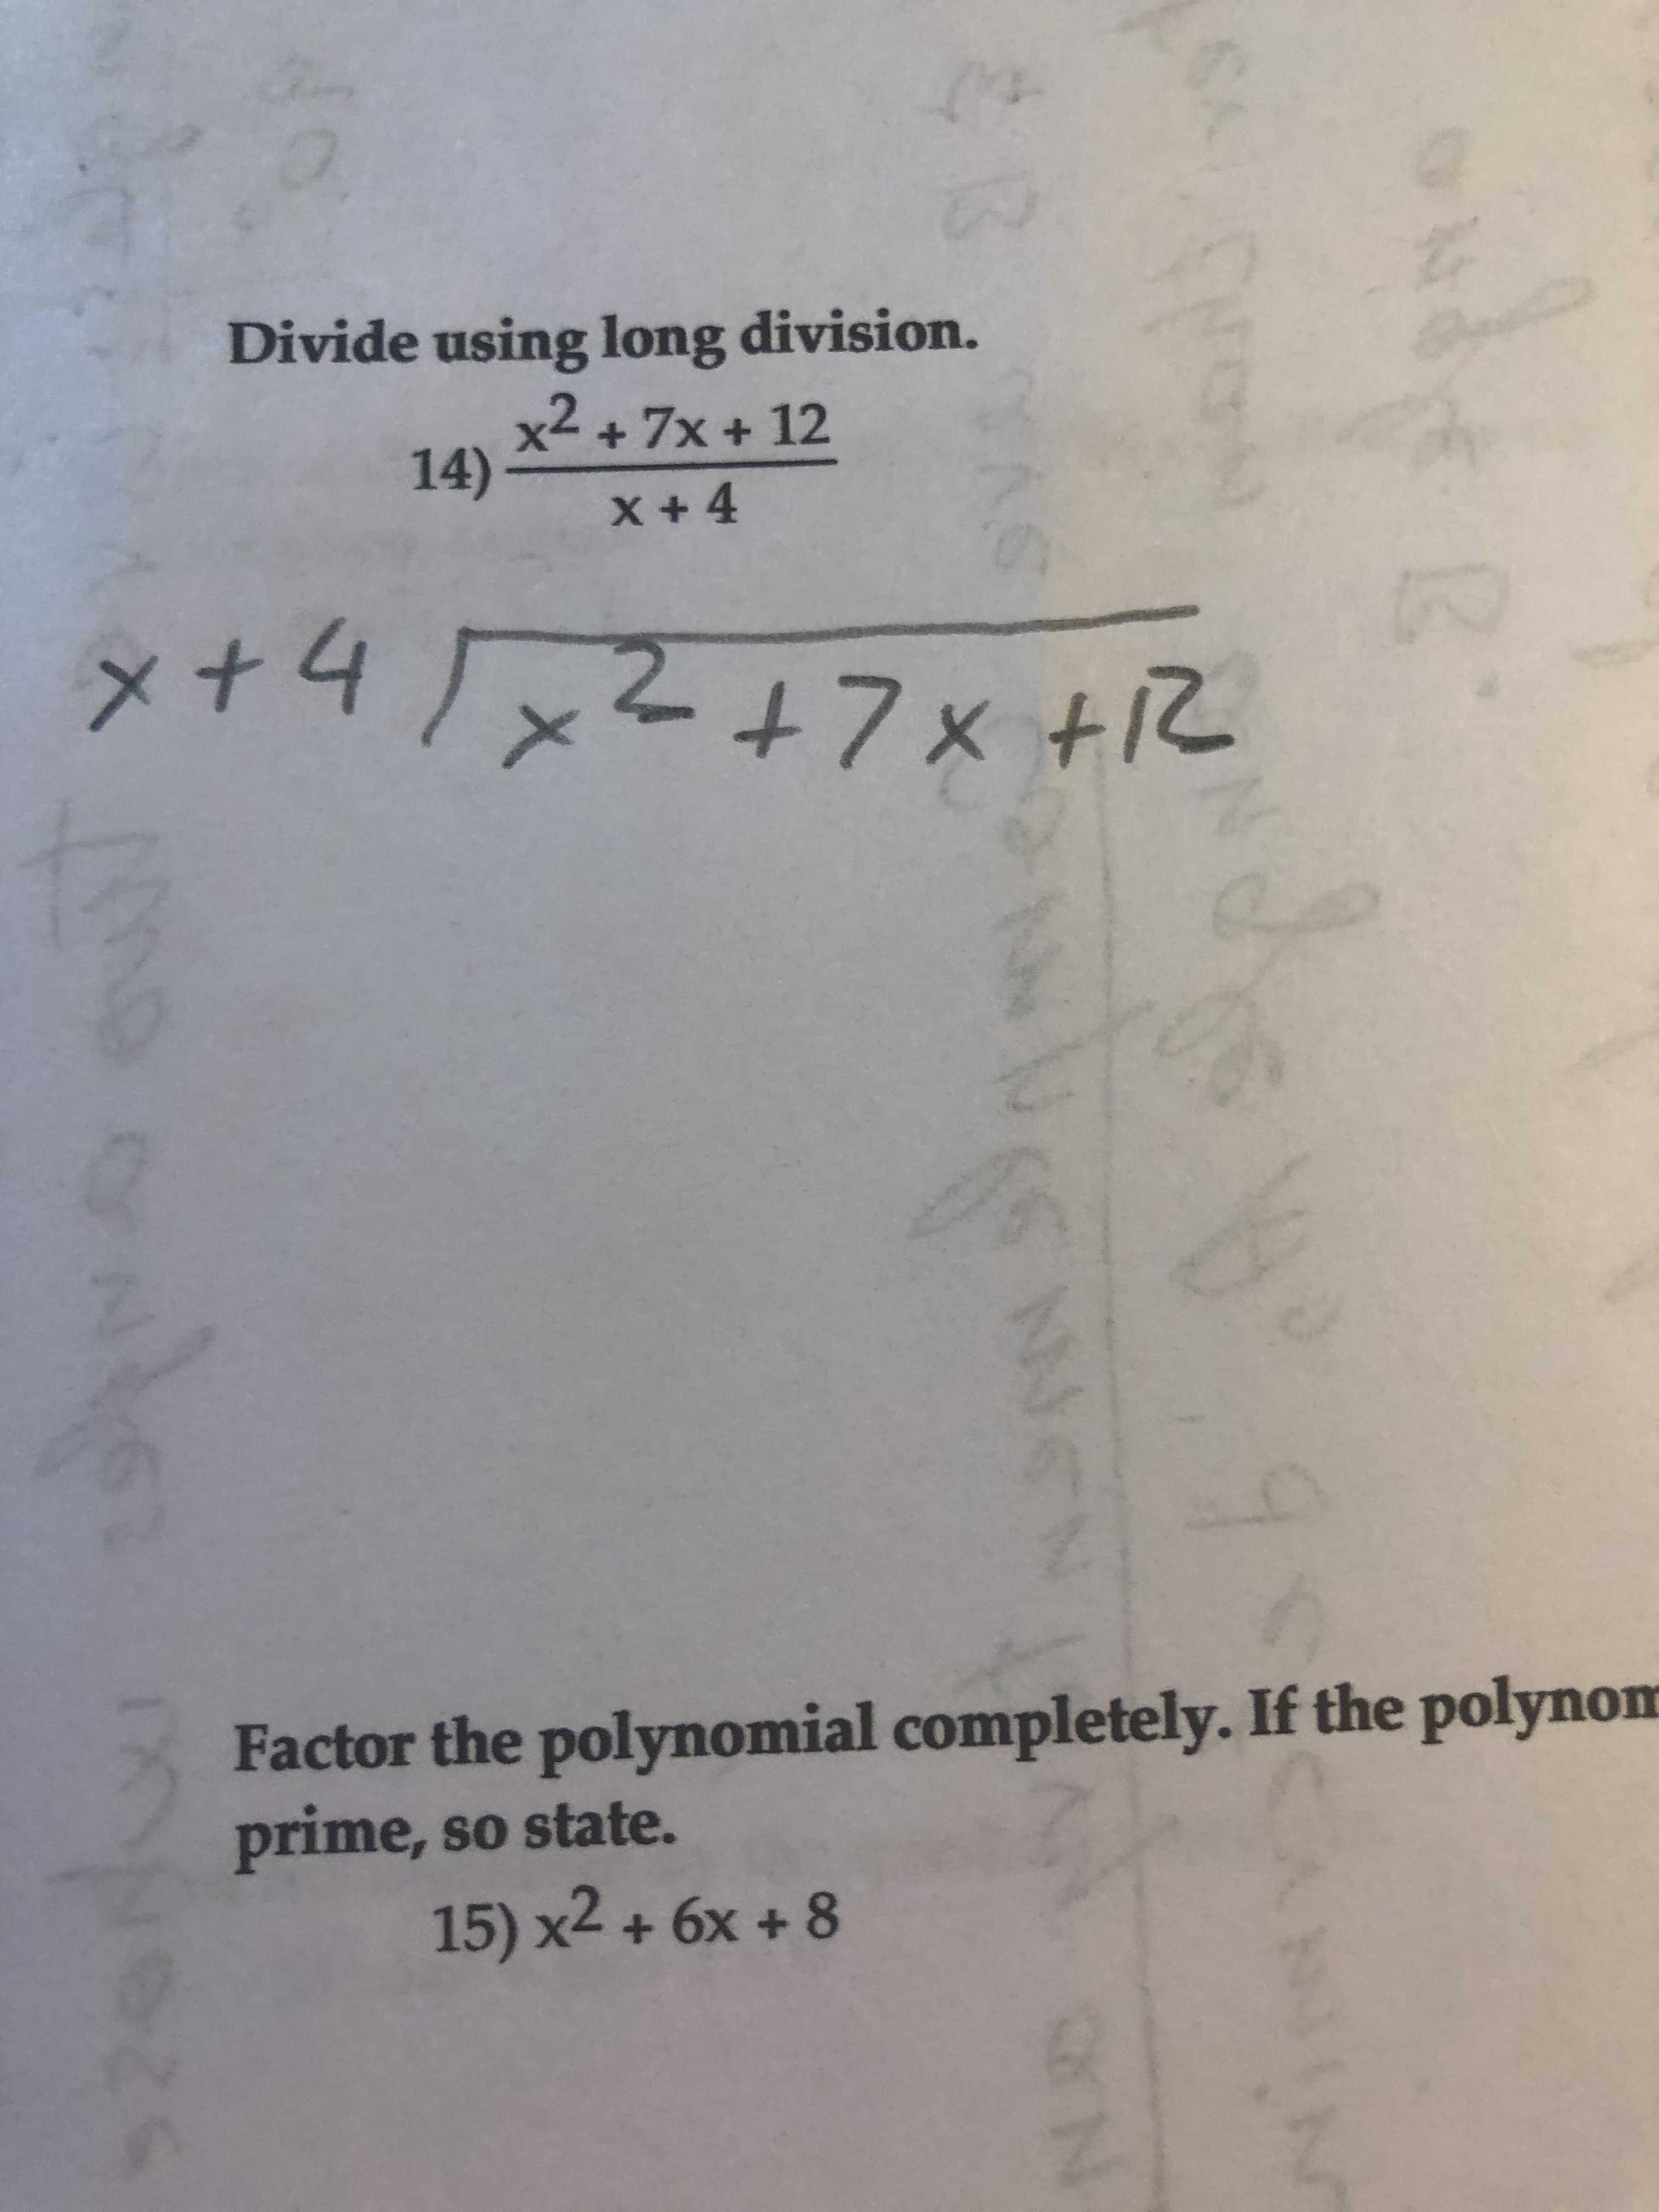 Divide using long division.
x2 +7x + 12
14) -
X + 4
